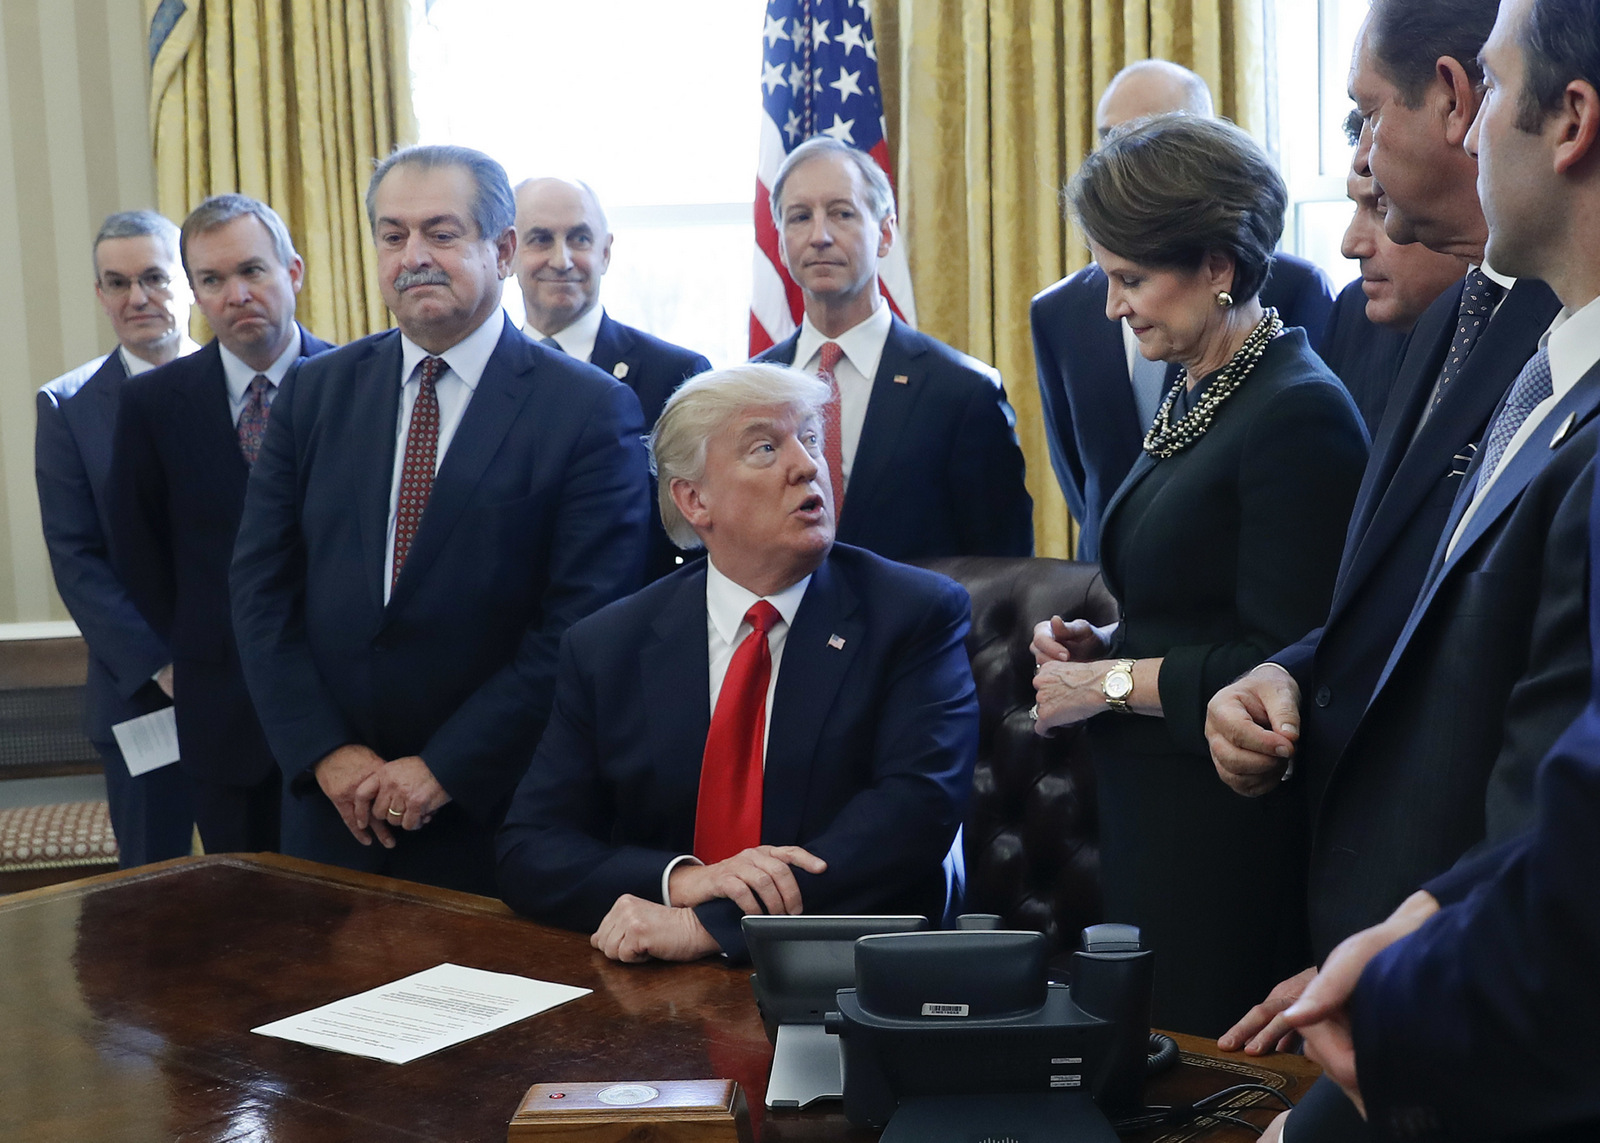 President Donald Trump looks over to Lockheed Martin Chairwoman, President and CEO Marillyn Hewson, right, before signing an executive order in the Oval Office of the White House in Washington, Feb. 24, 2017.(AP/Pablo Martinez Monsivais)